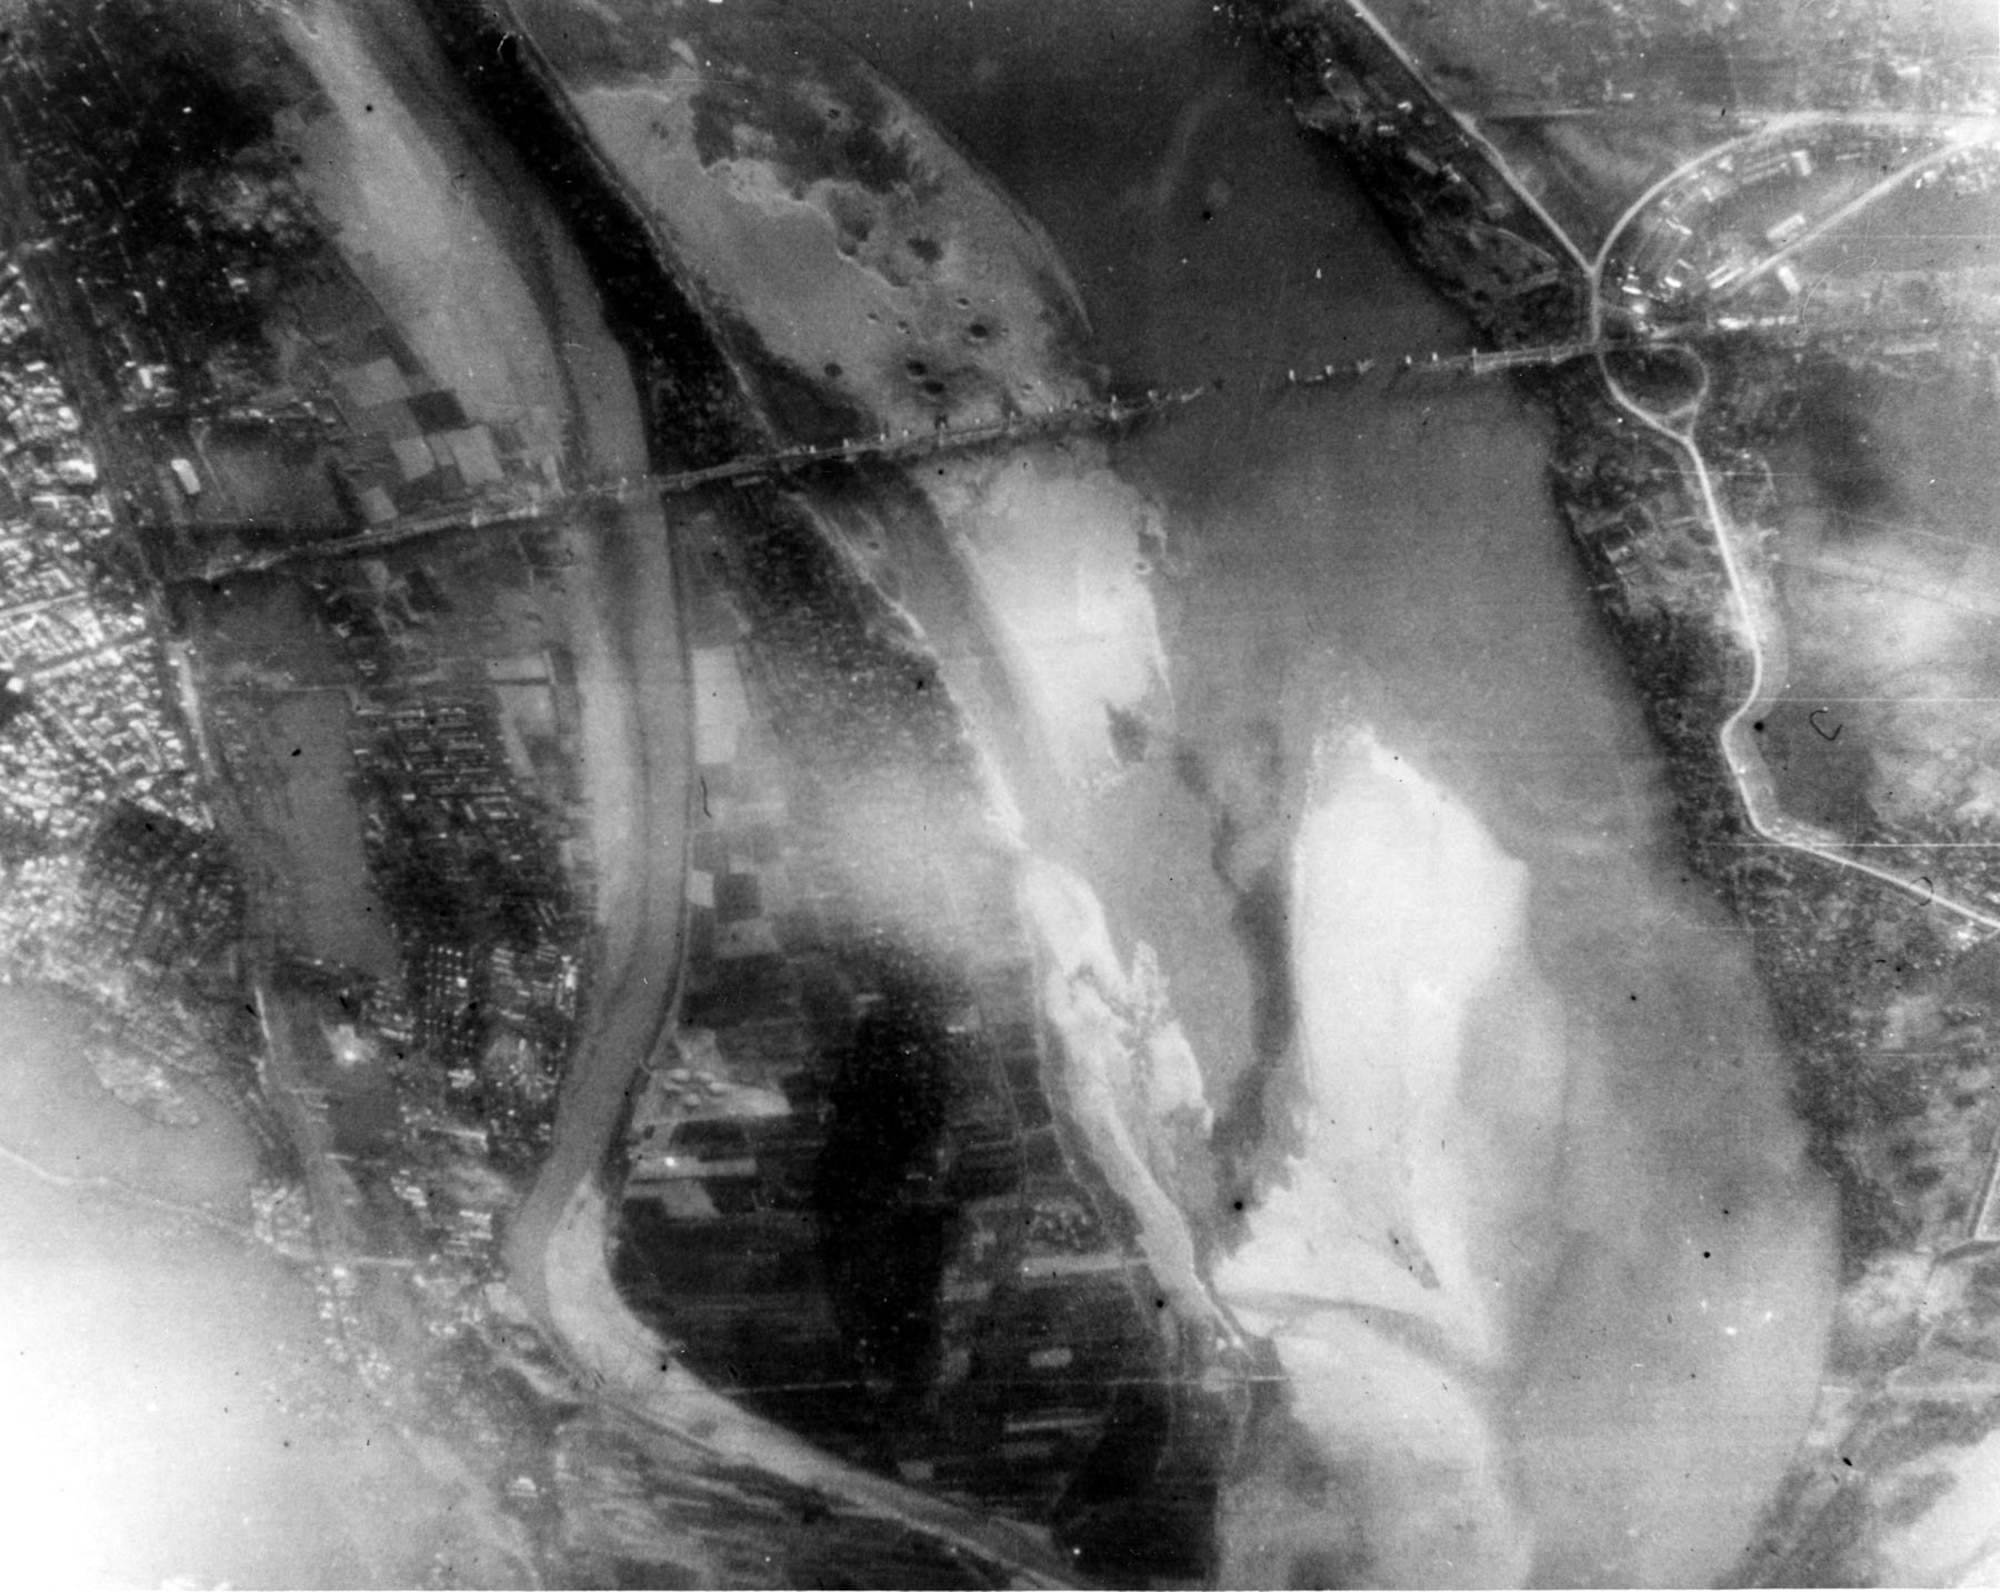 Aerial reconnaissance photograph of the famous Paul Doumer Bridge, located just outside of Hanoi, after laser-guided munitions destroyed it. (U.S. Air Force photo)